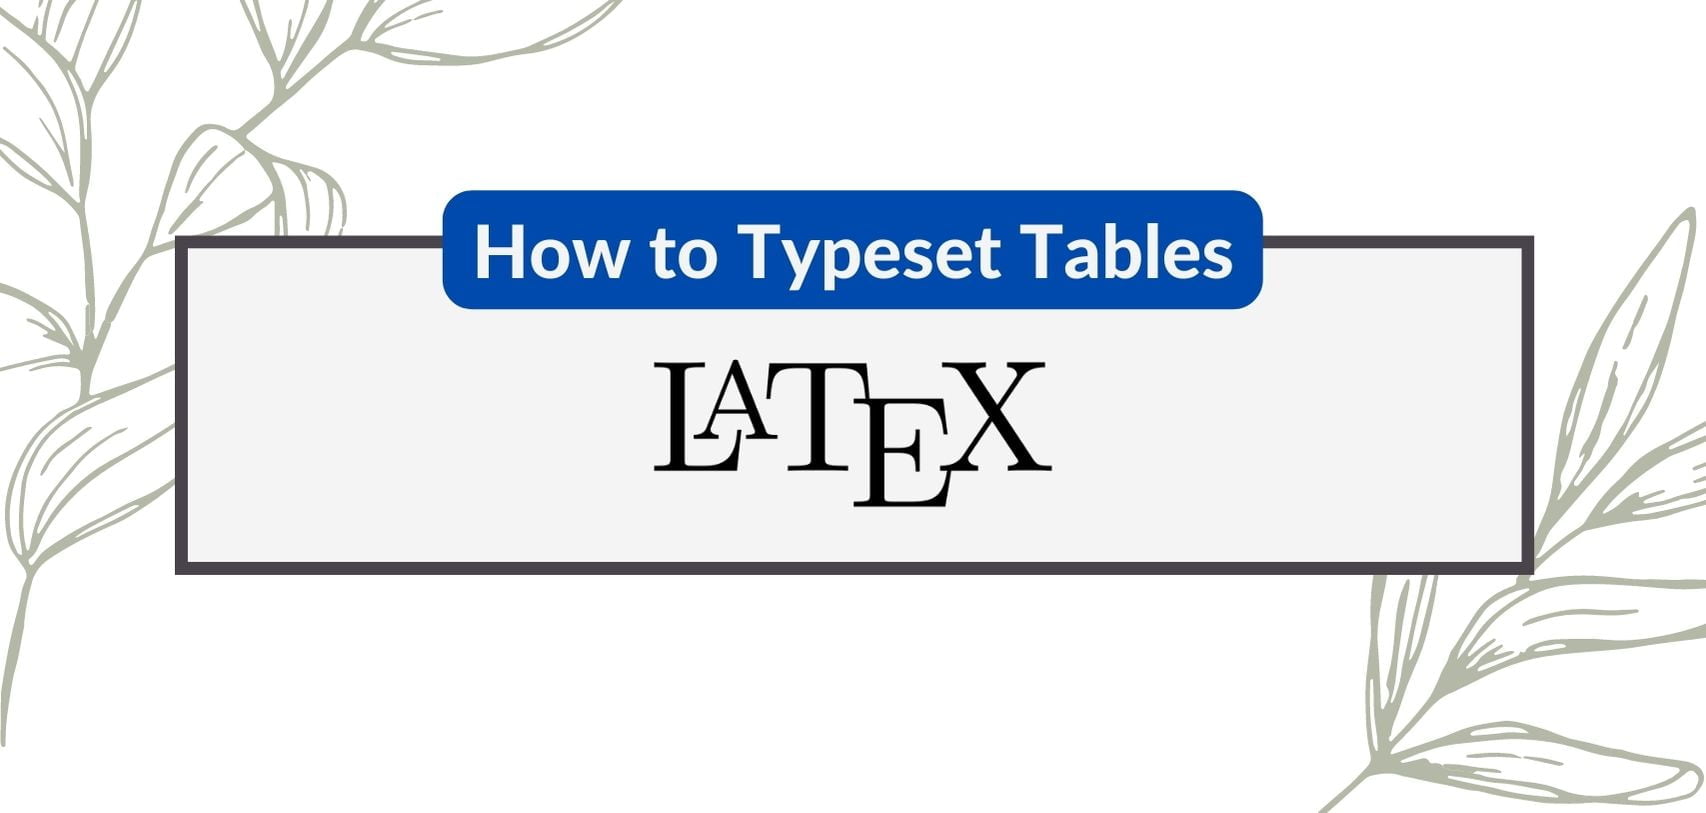 Typesetting tables in LaTeX